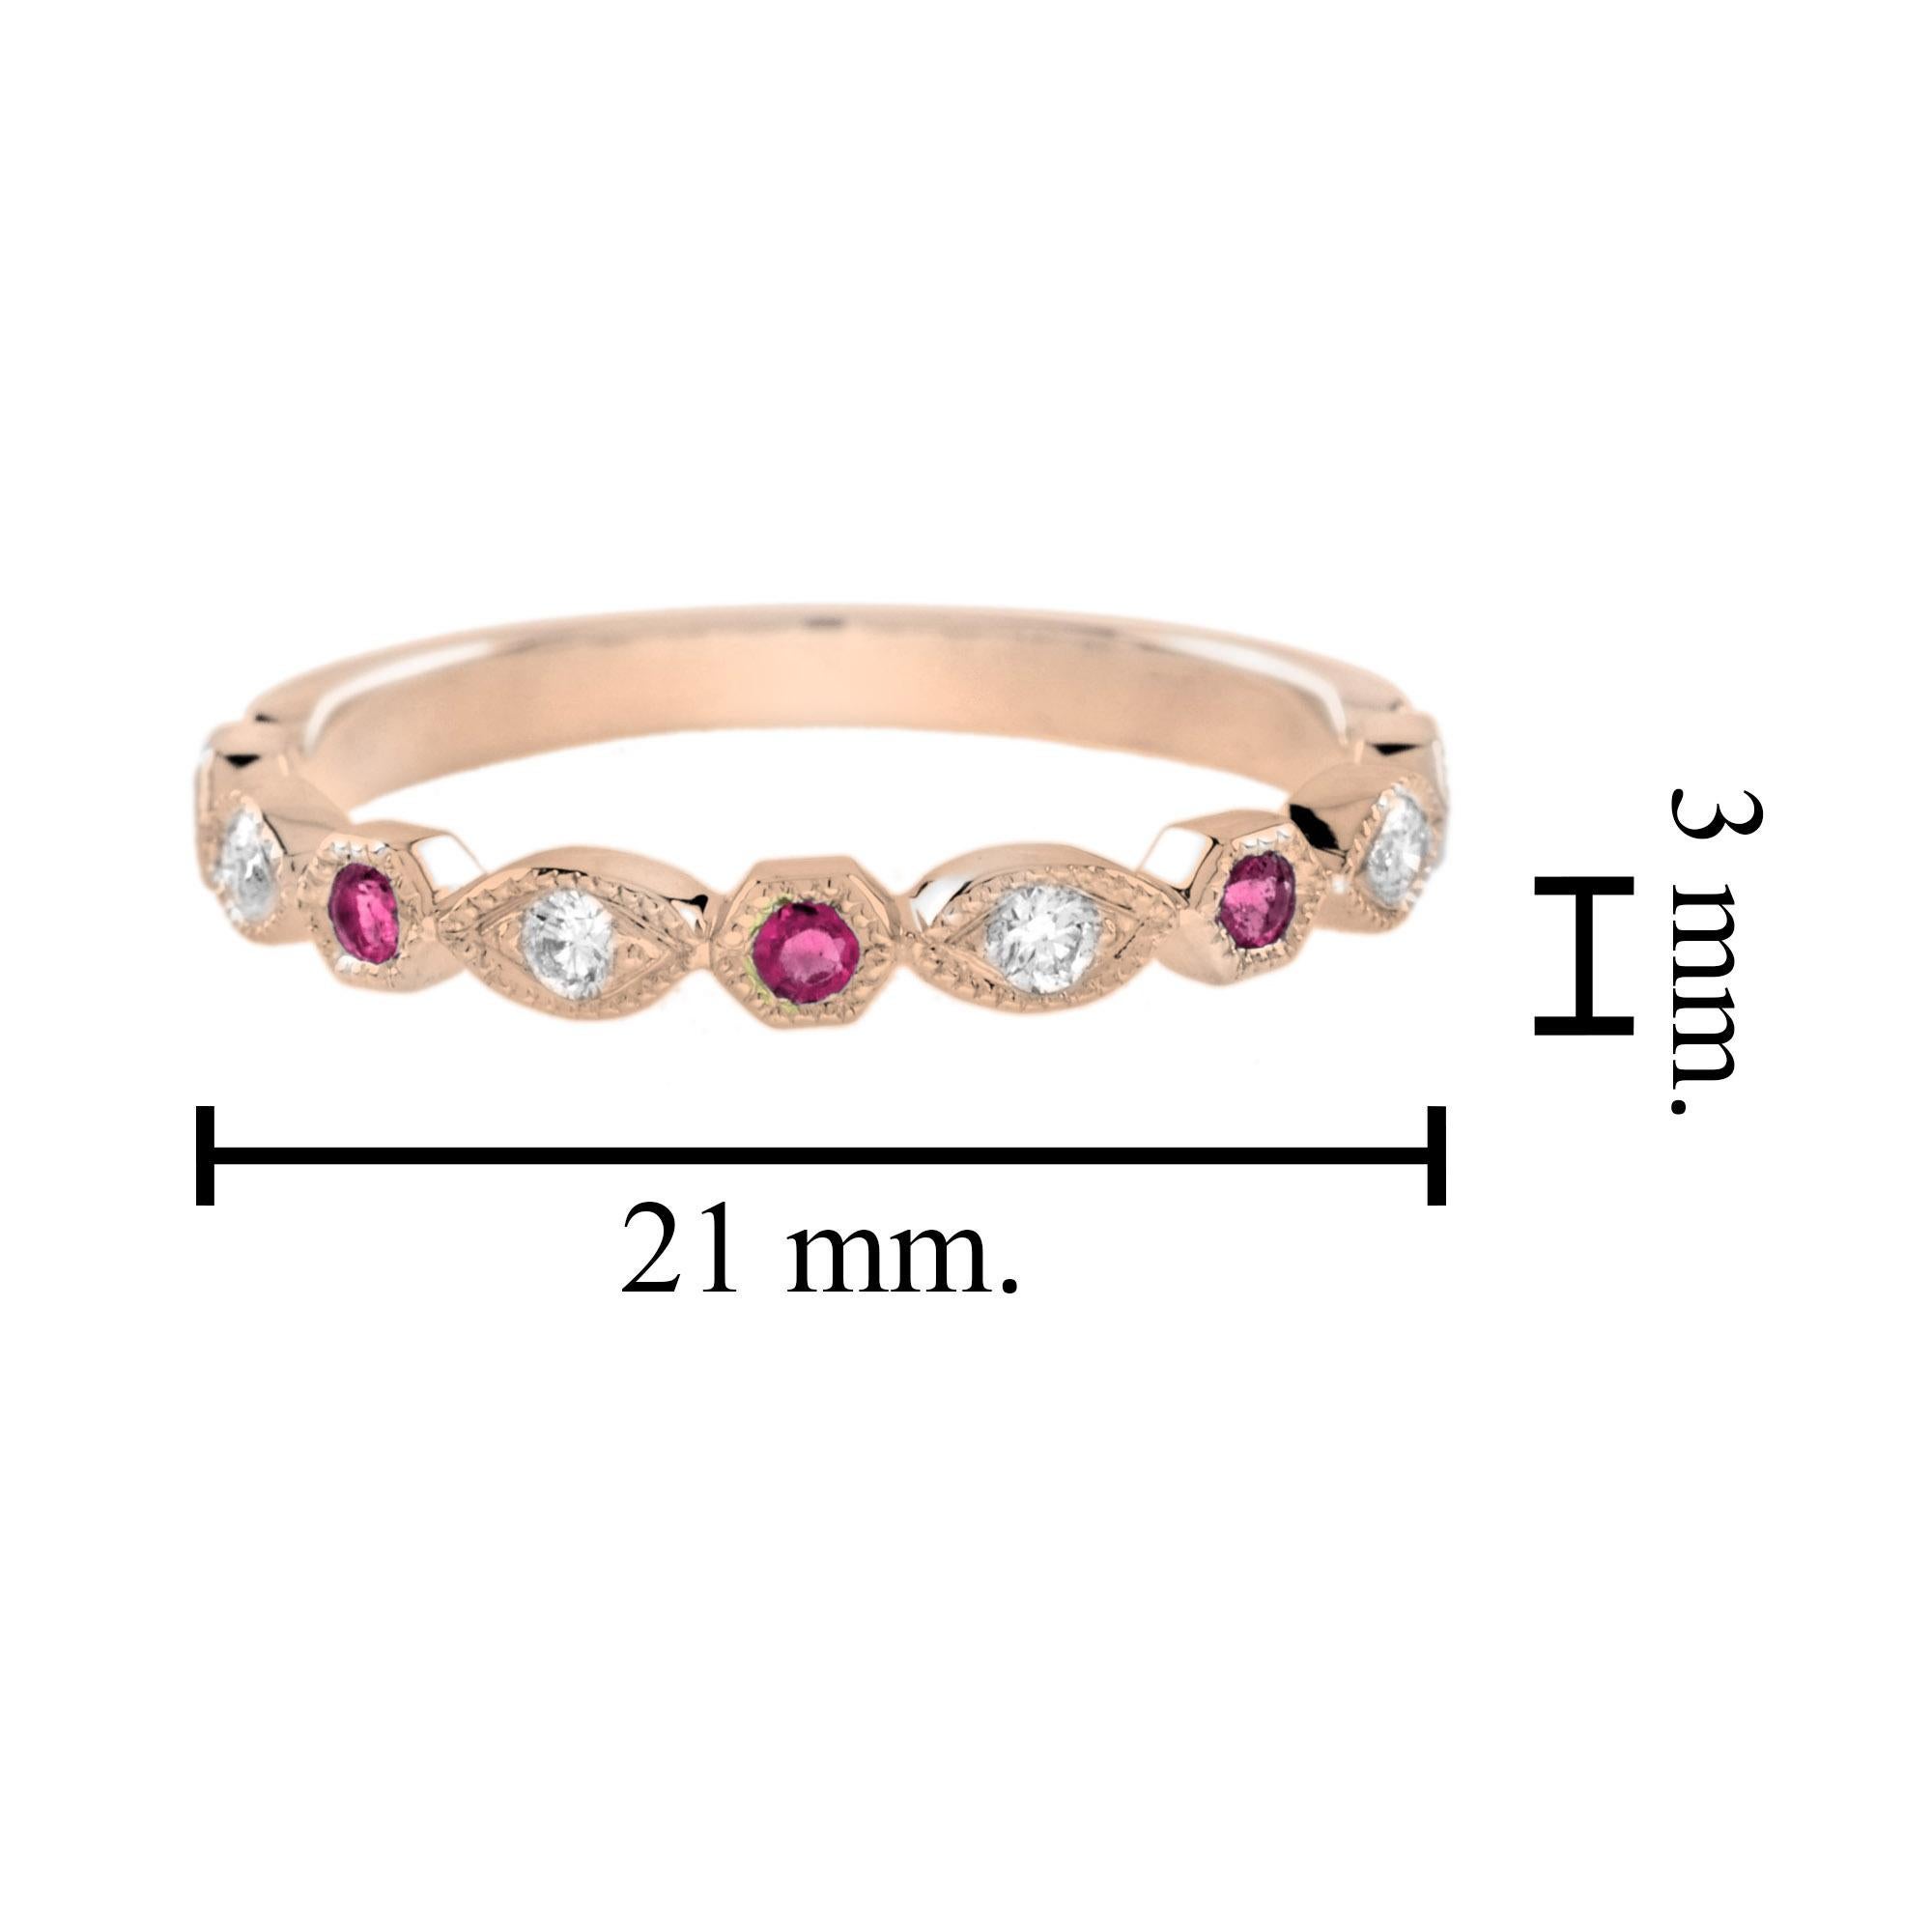 For Sale:  Ruby Diamond Vintage Style Band Ring and Huggies Earrings Lover Set in 14K Rose 7